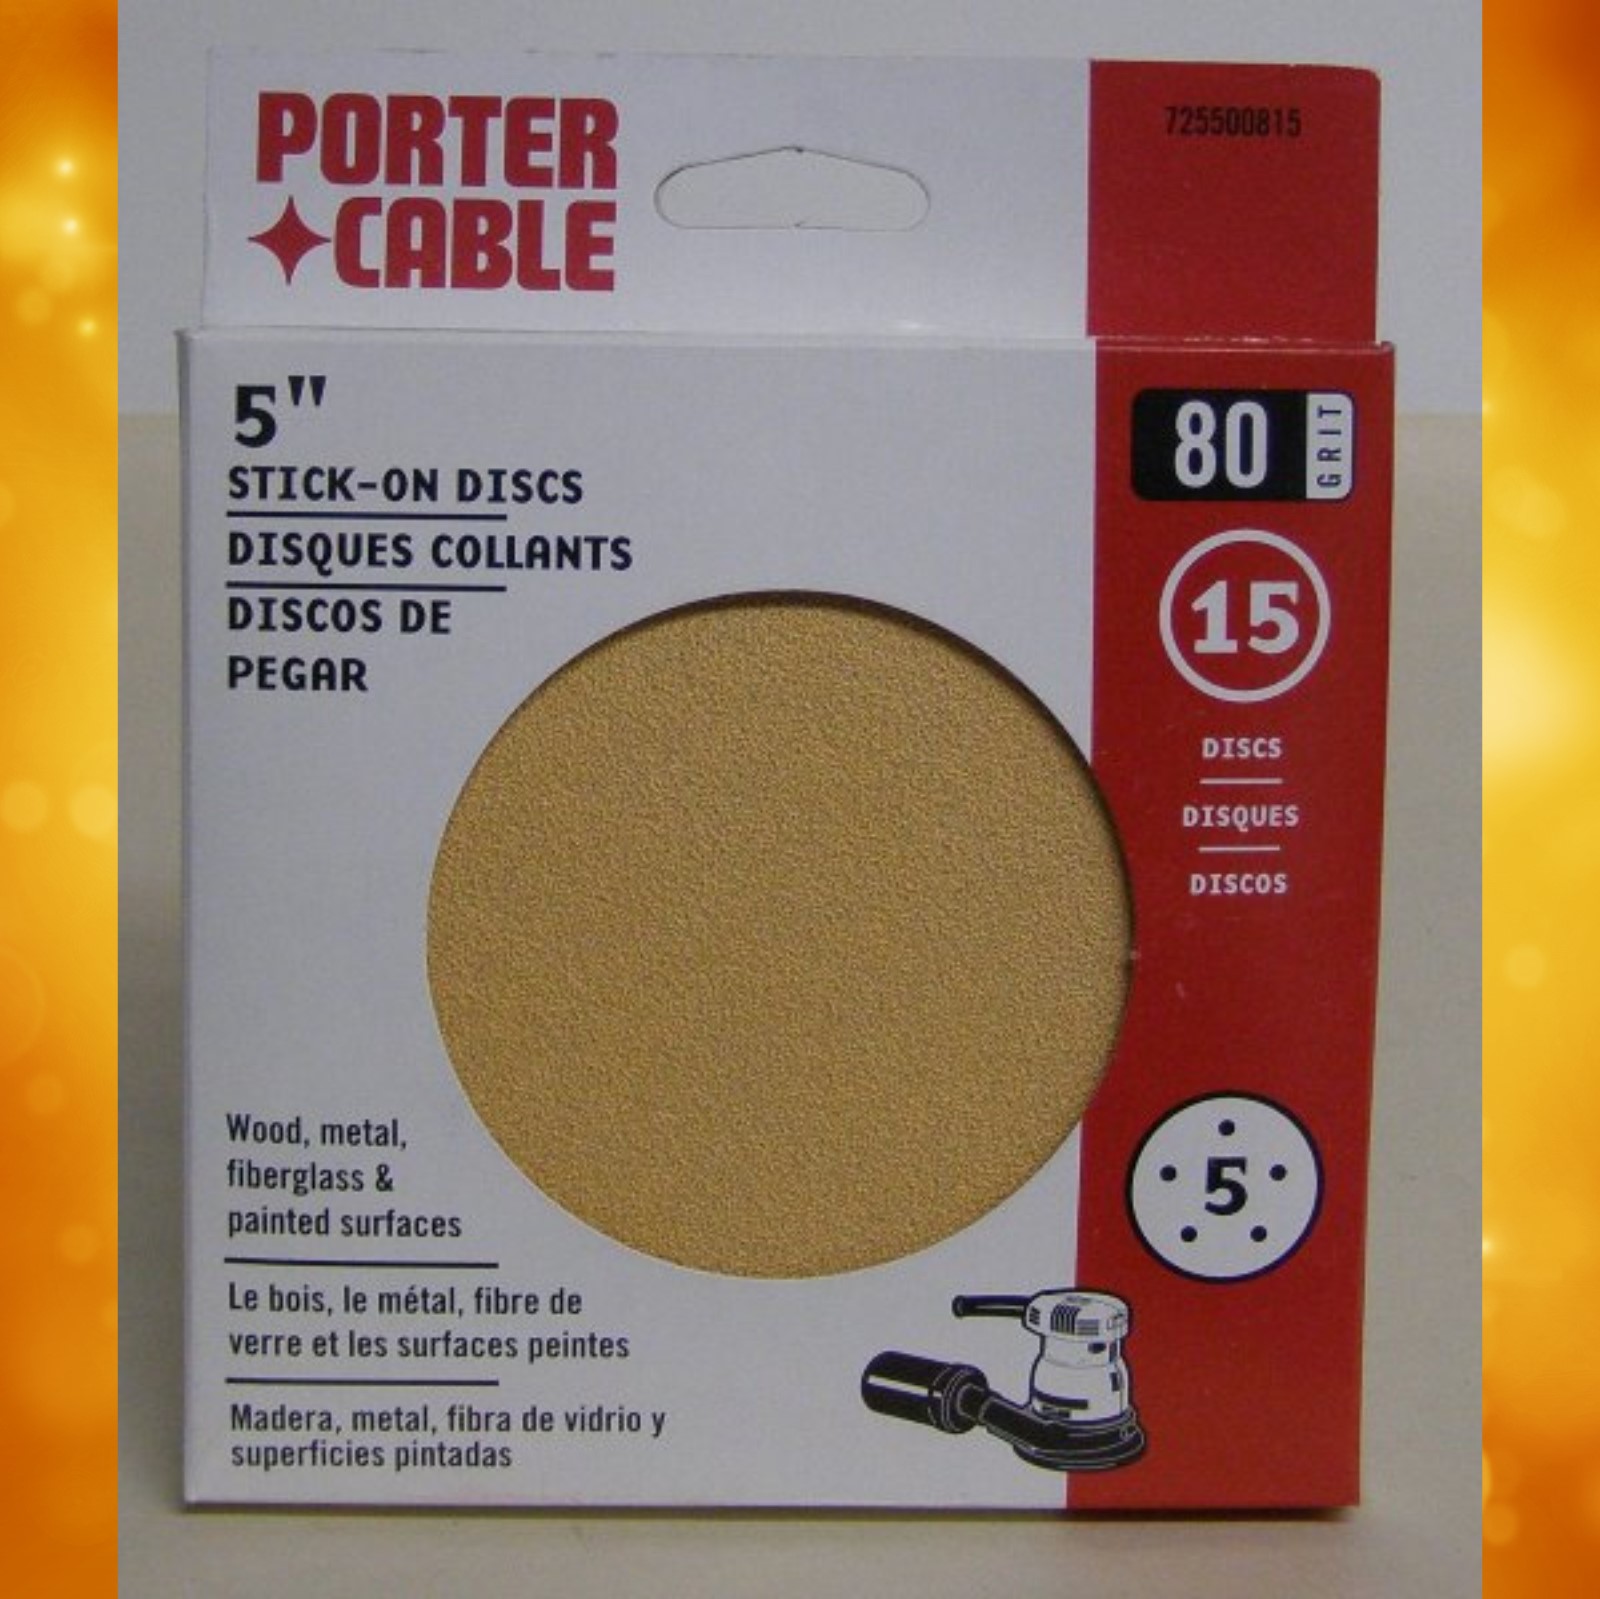 PORTER-CABLE Sandpaper Roll， Adhesive-Backed， 4 1/2-Inch X 10